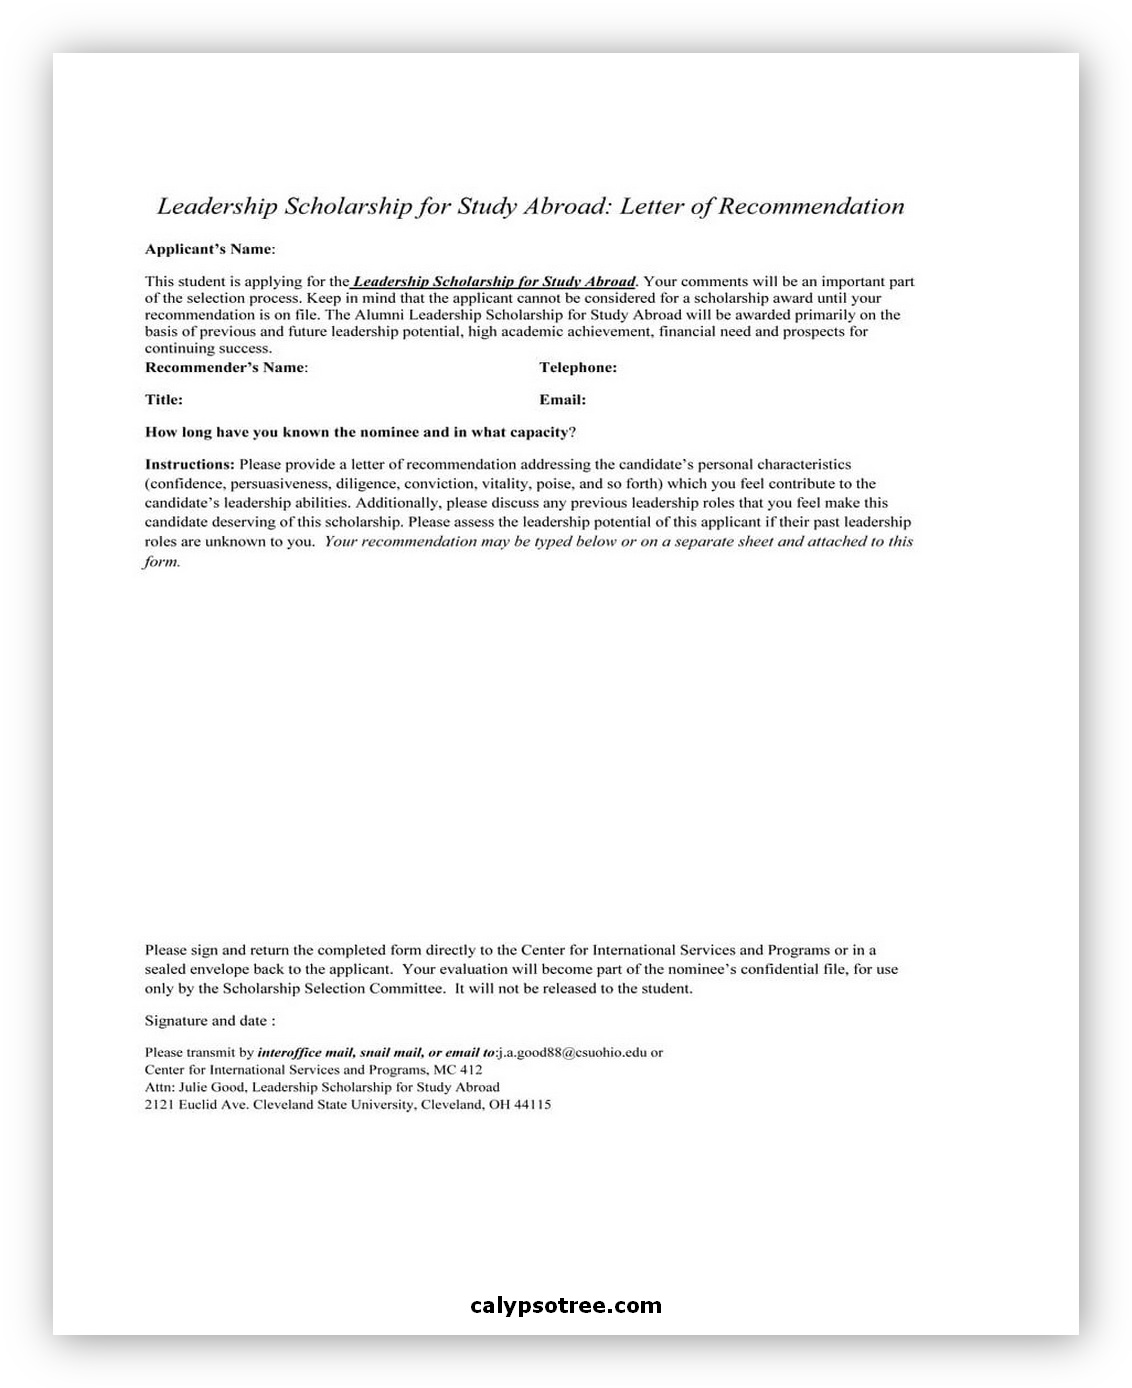 Letter of Recommendation for Scholarship 07